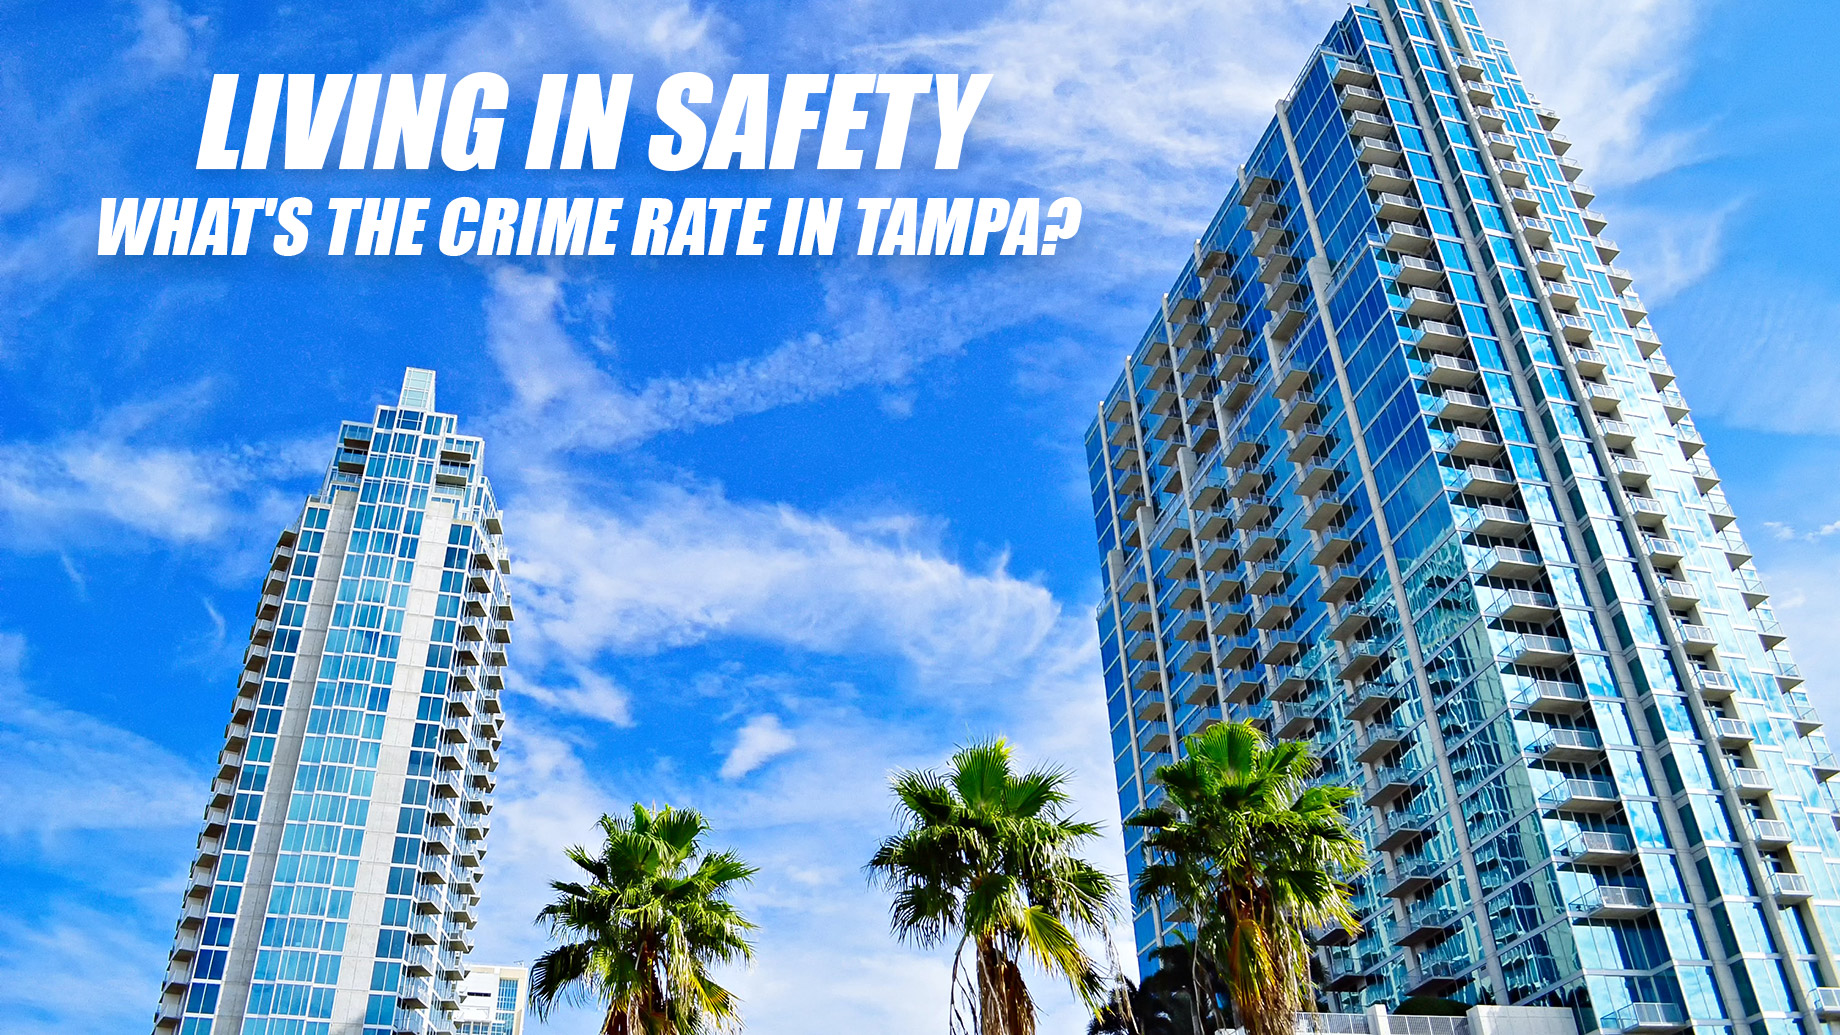 Living in Safety - What's the Crime Rate in Tampa?